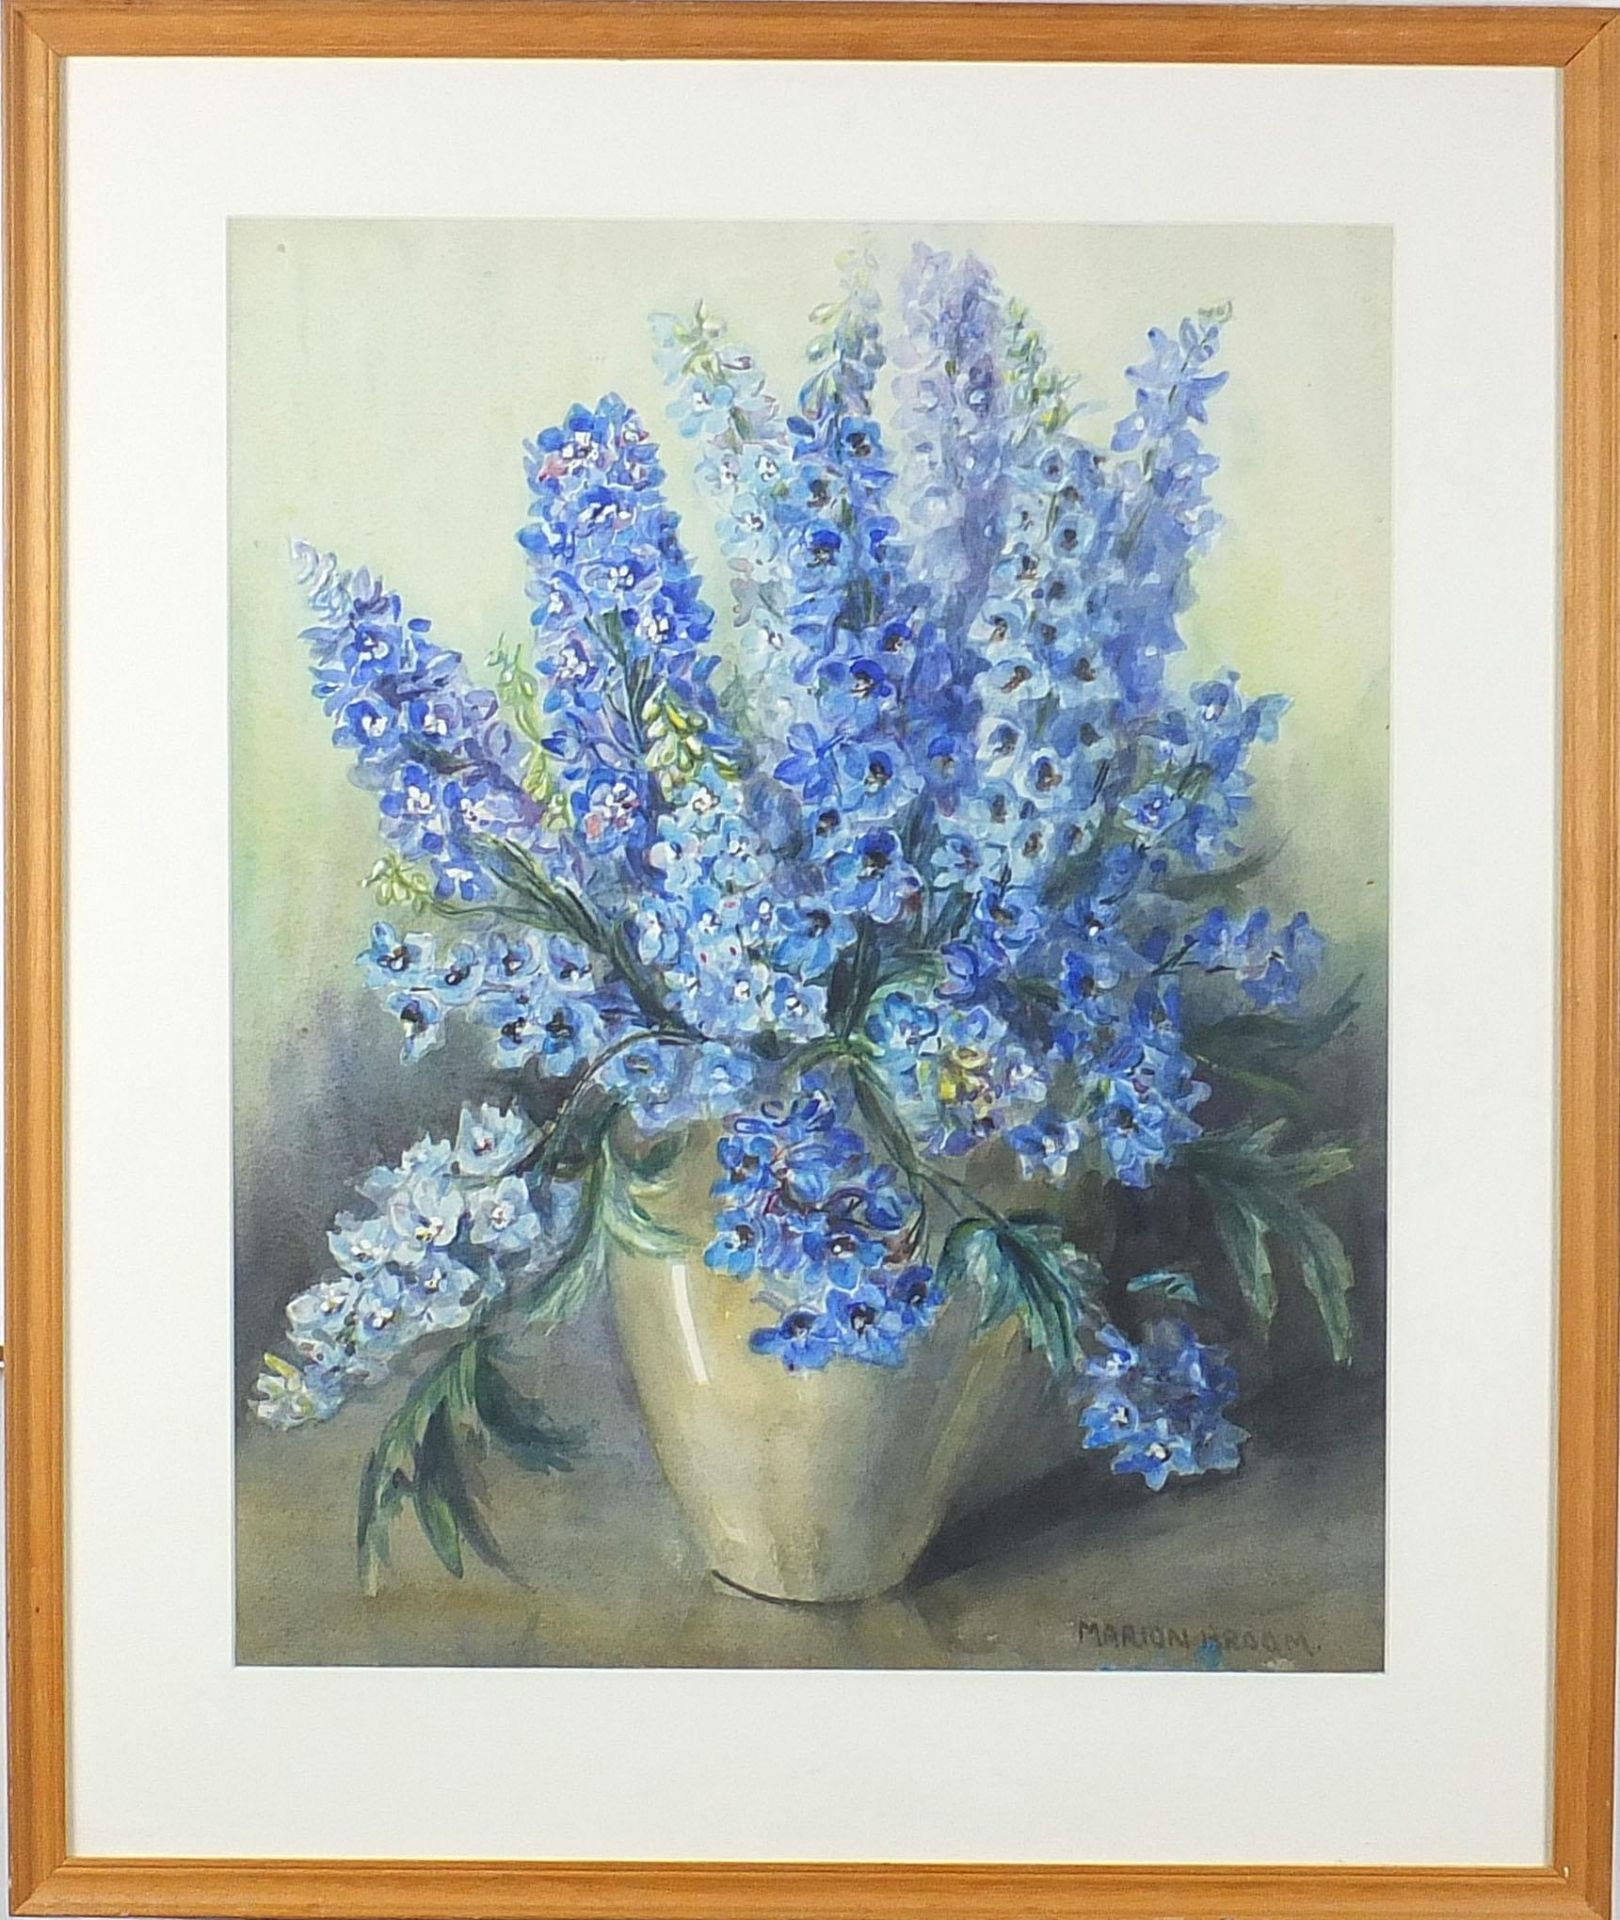 Marion L Broom - Still life flowers in a vase, 20th century watercolour, mounted, framed and glazed, - Image 2 of 5